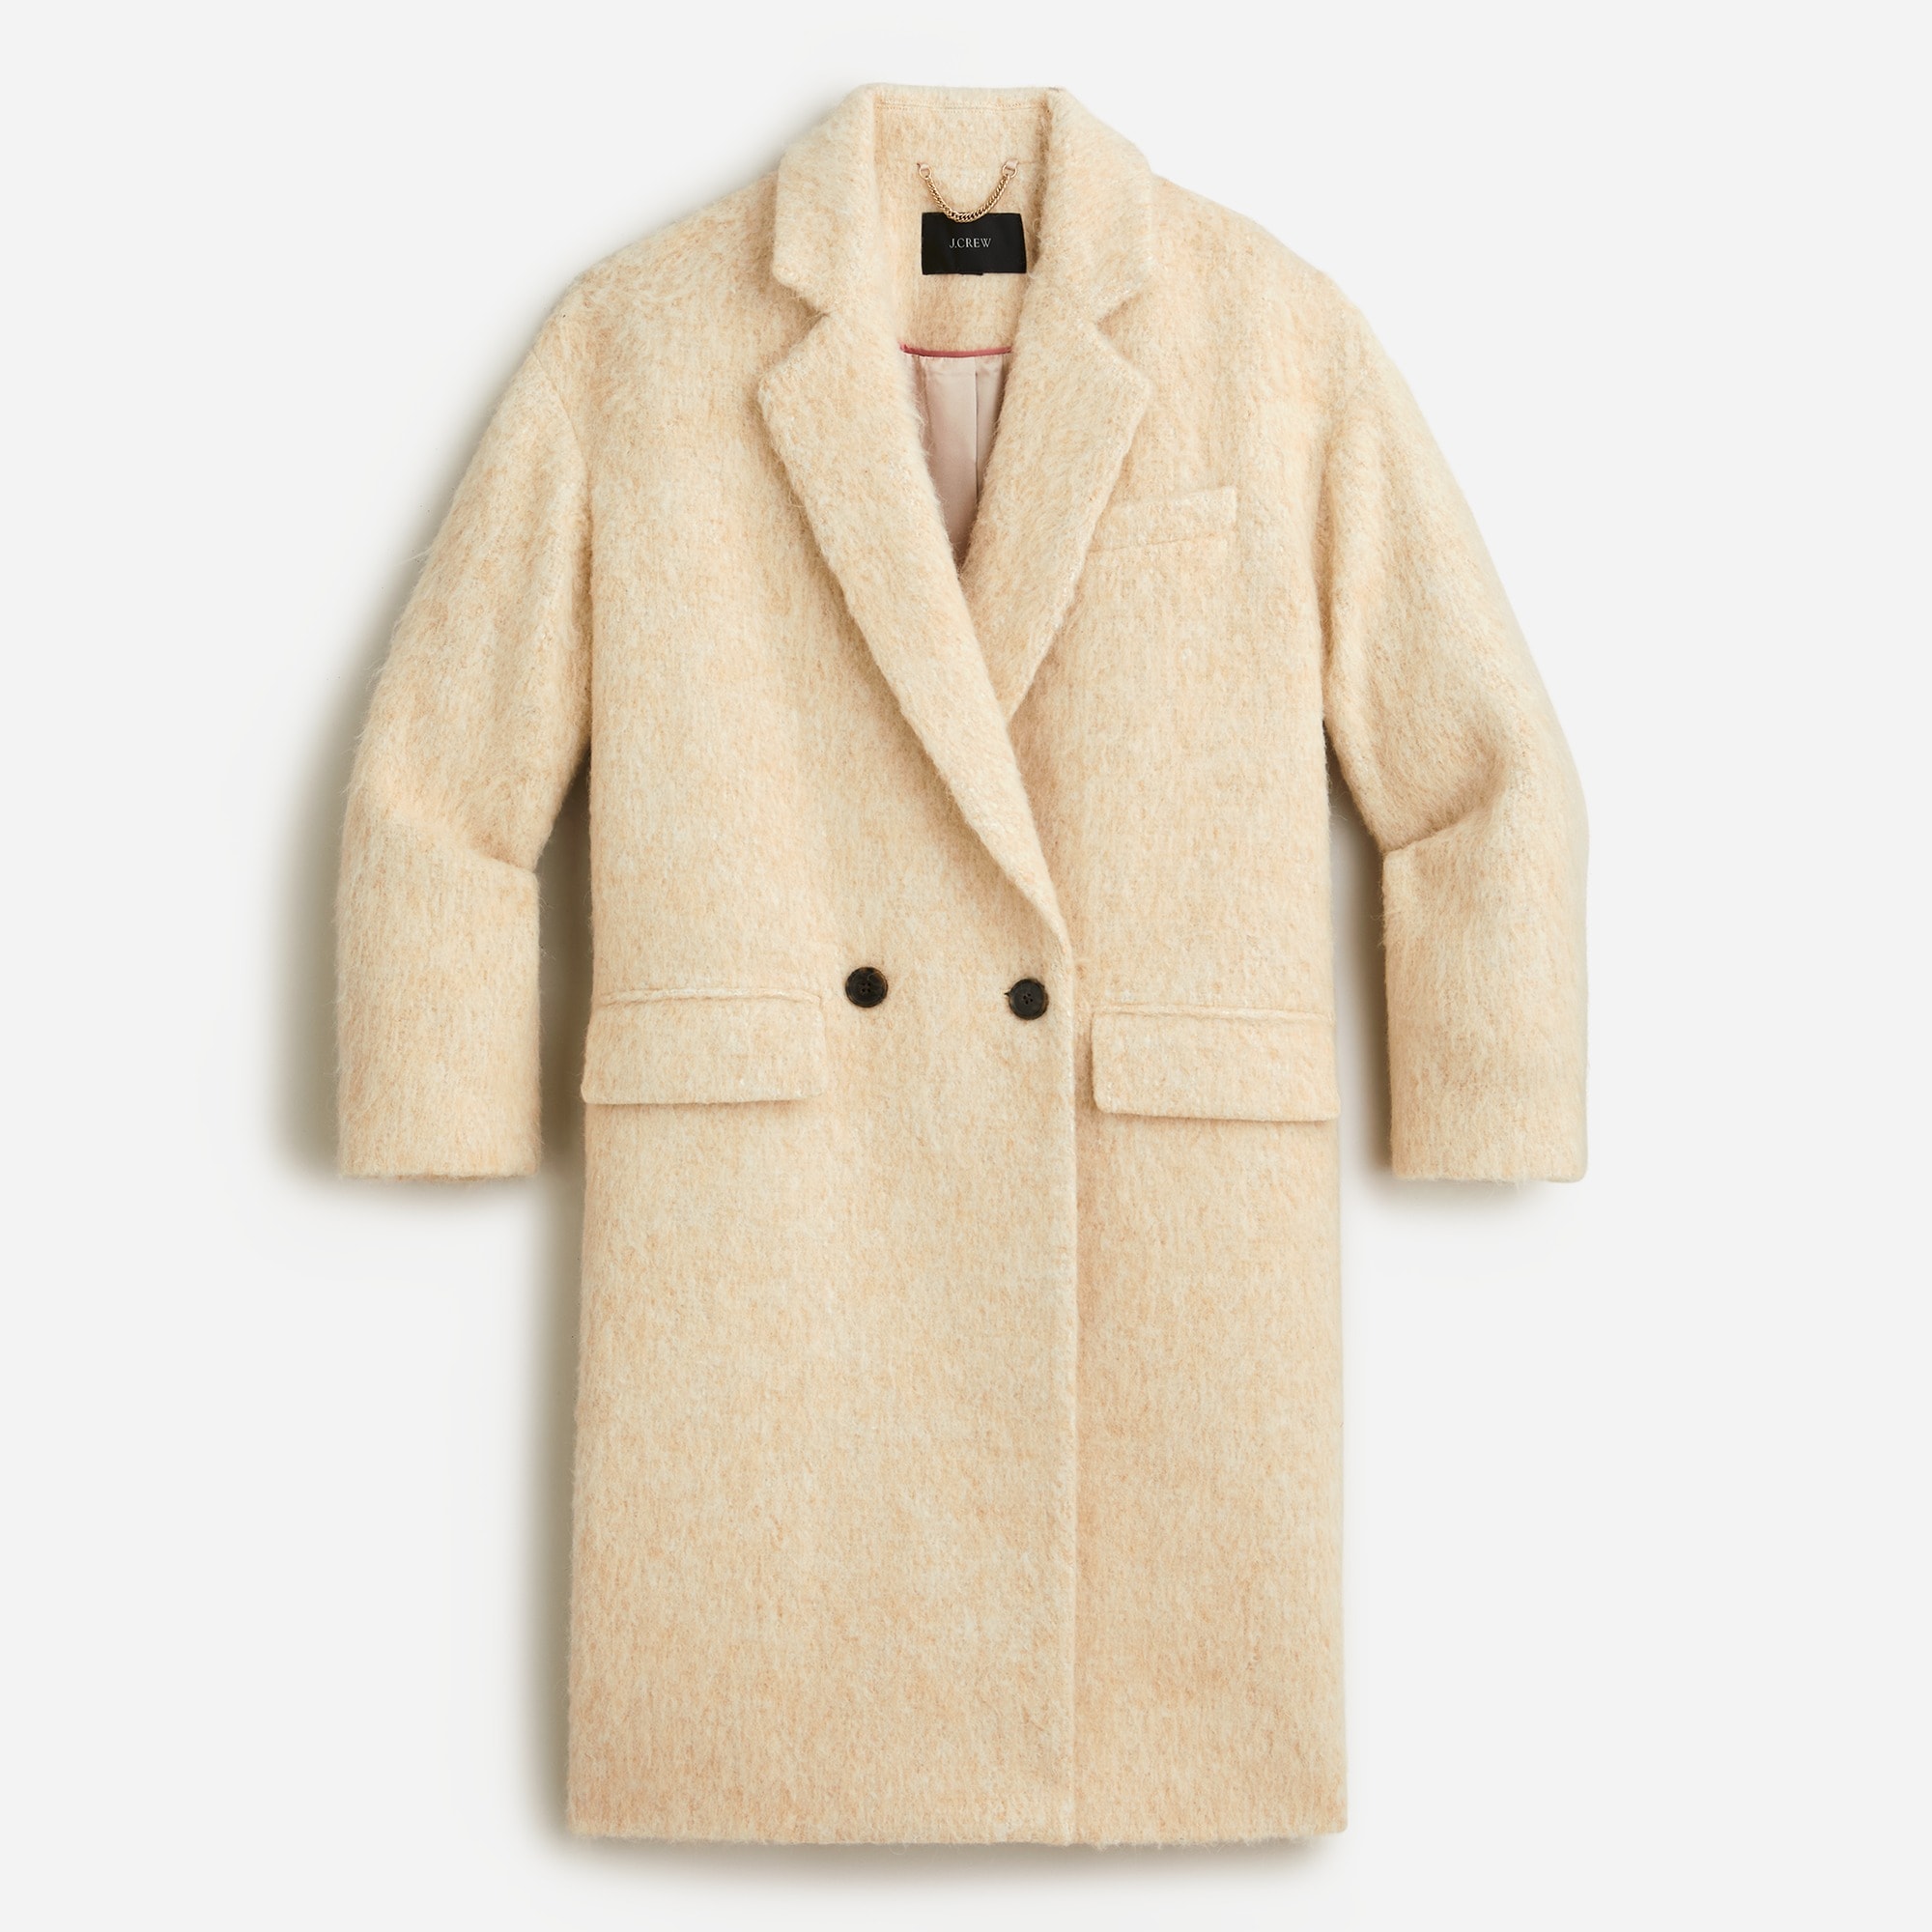 J.Crew: Relaxed Topcoat In Italian Brushed Wool Blend For Women